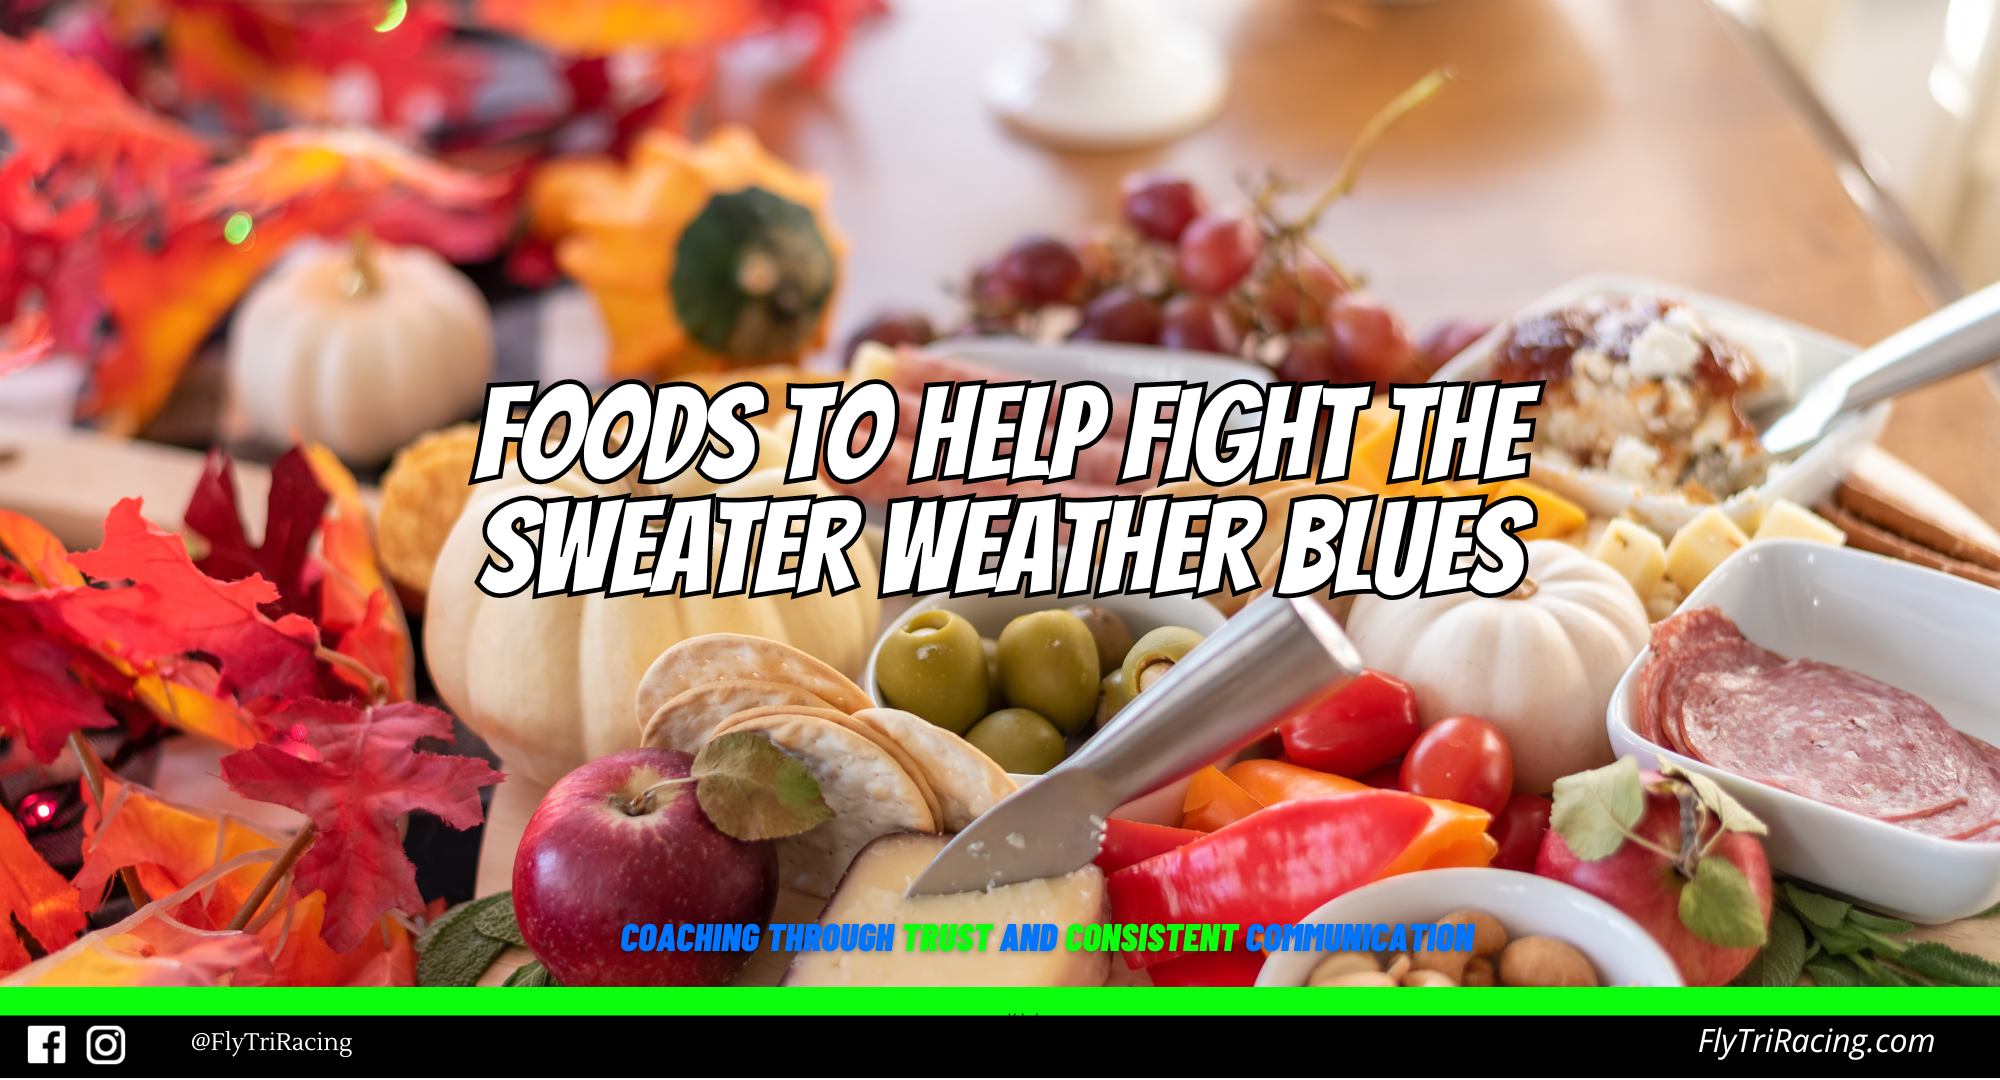 You are currently viewing Foods to Help Fight the Sweater Weather Blues